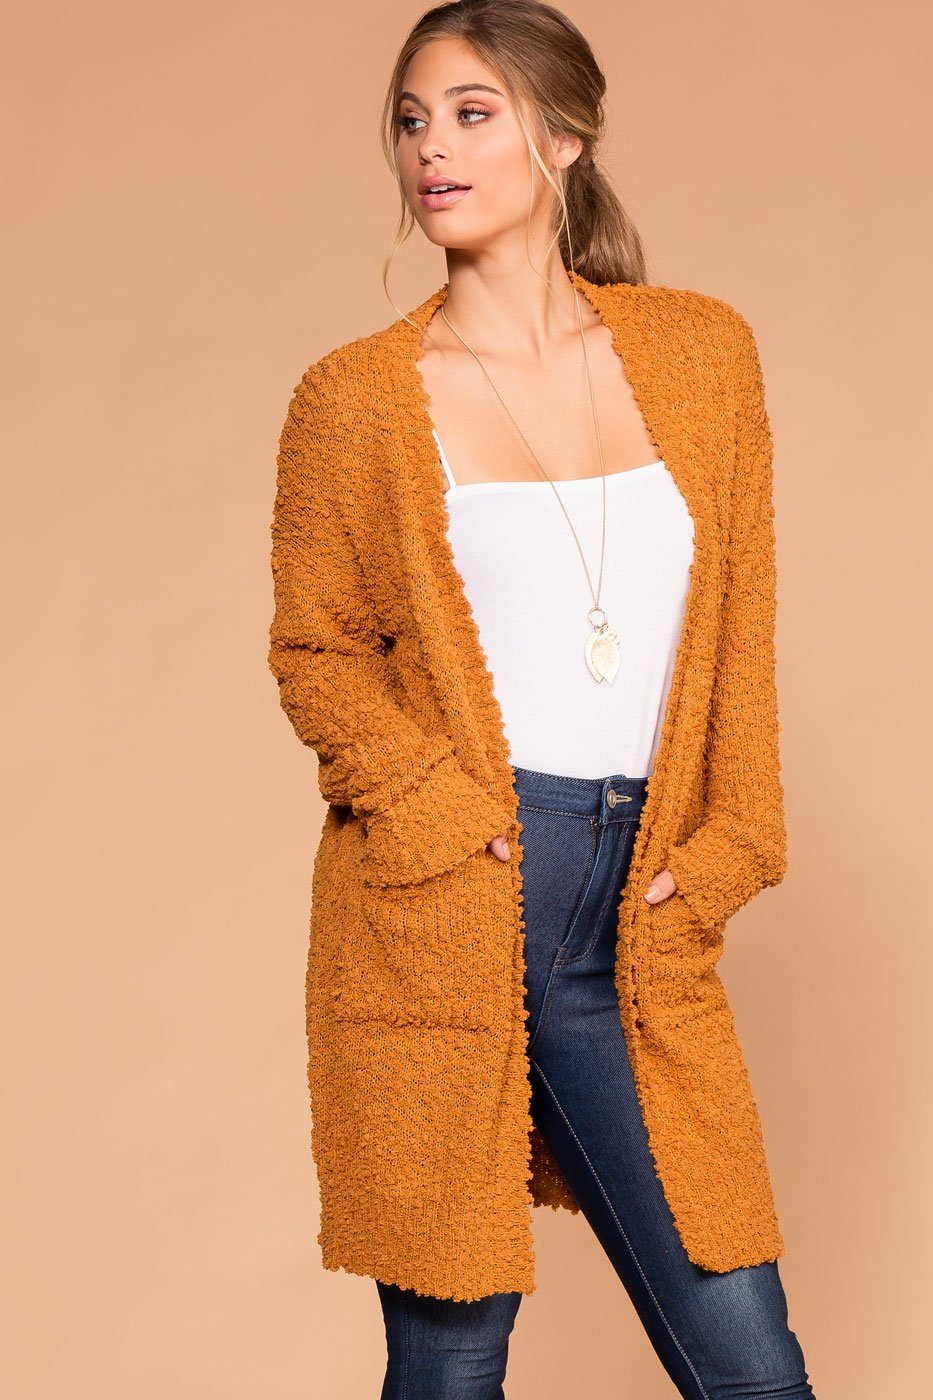 long mustard cardigan outfit